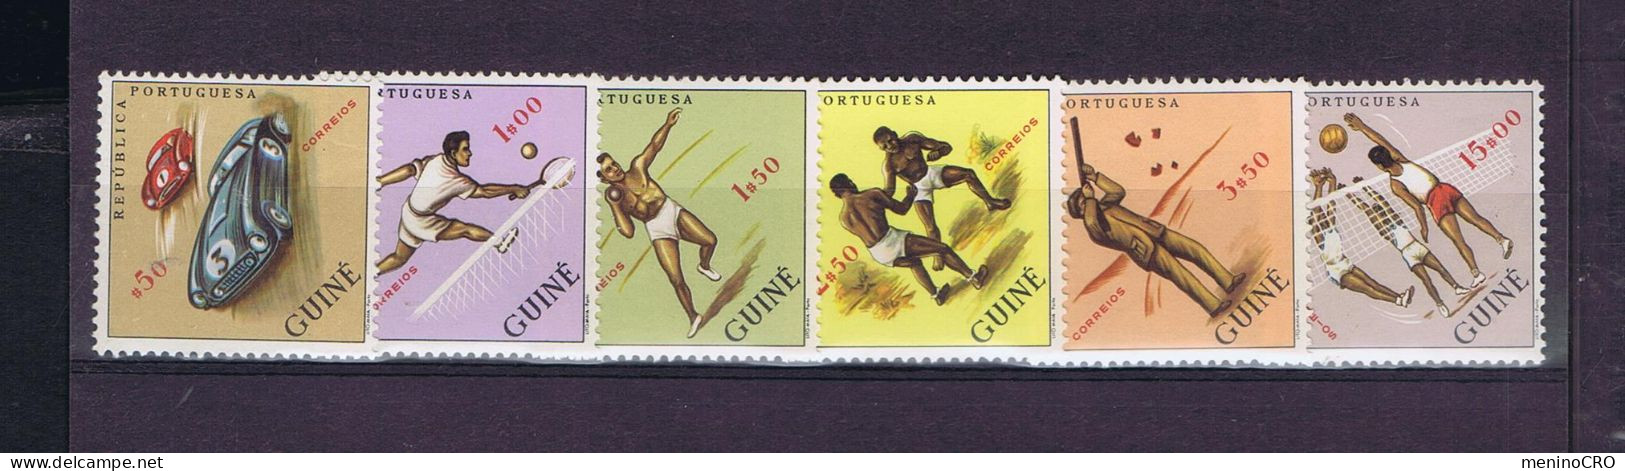 Gc8059 GUINÉ Port. Sports Divers 1962 Set 6v. Mint Issue Portugal - Volleybal